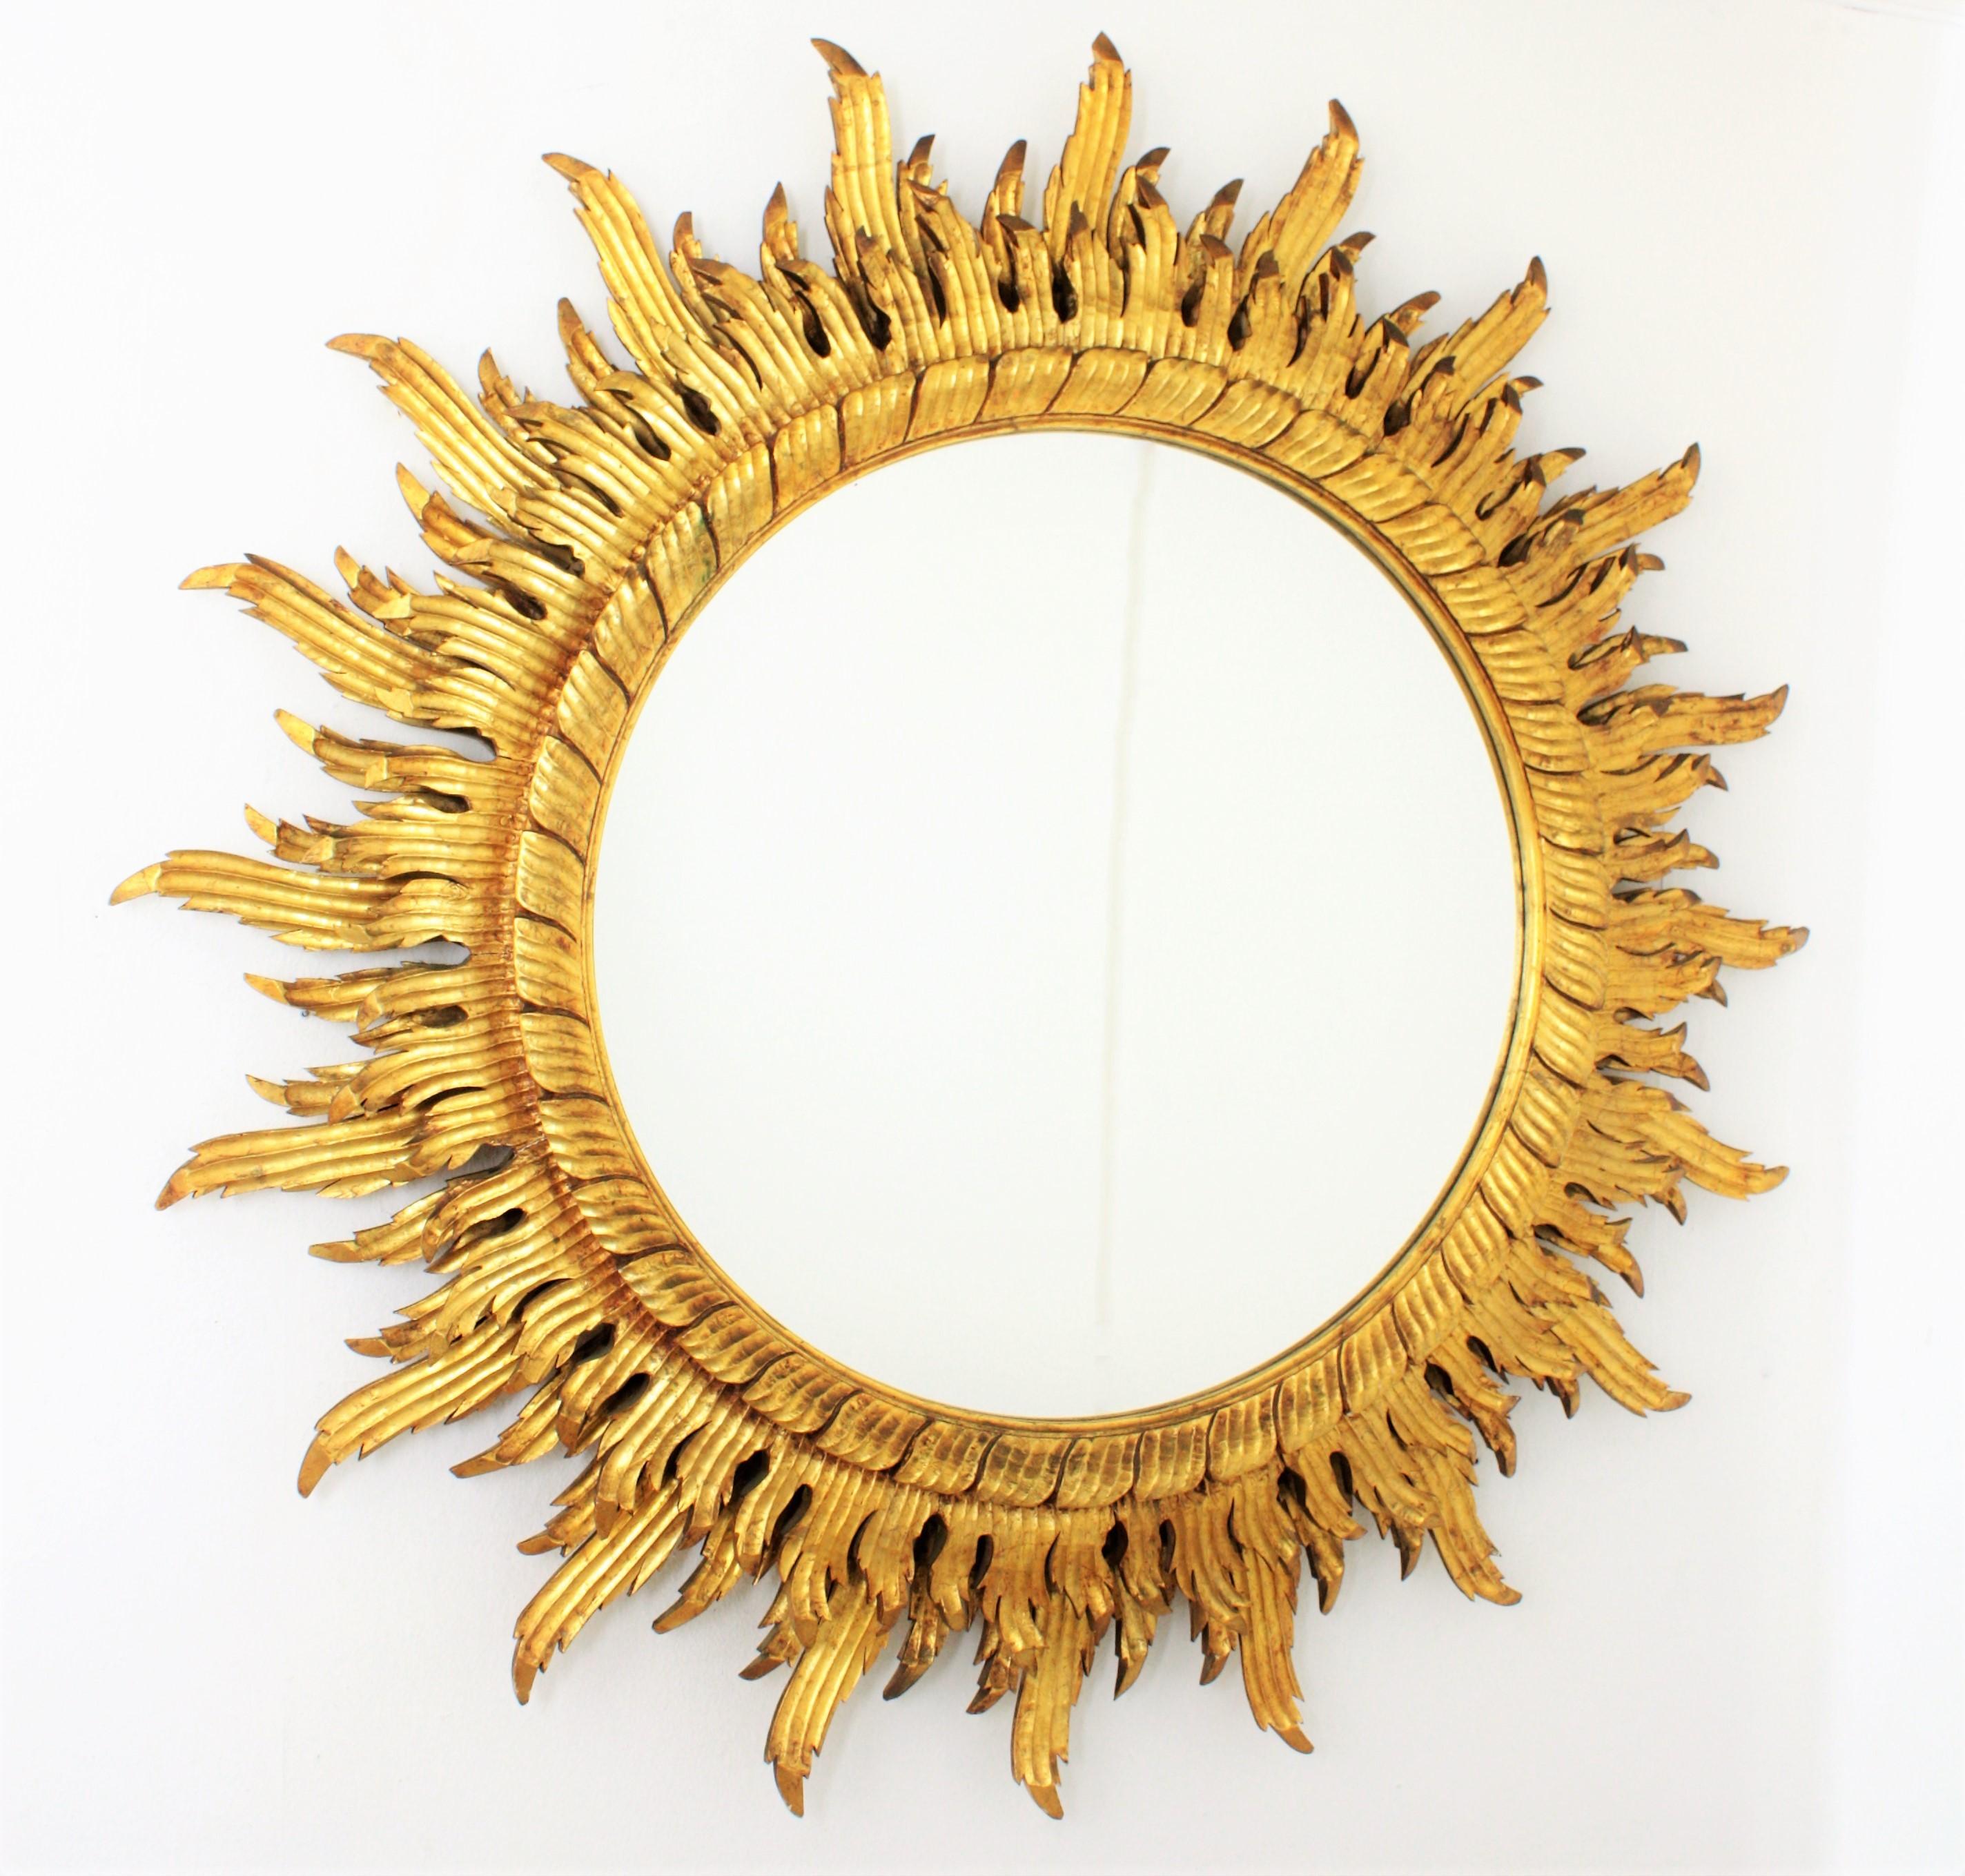 Unique large-scale (132cm diameter) Baroque style carved wood gold leaf gilt double layered sunburst mirror. Unusual piece in this size. The mirror has a wood carved round frame surrounding the circular glass and two layers of wood carved rays in